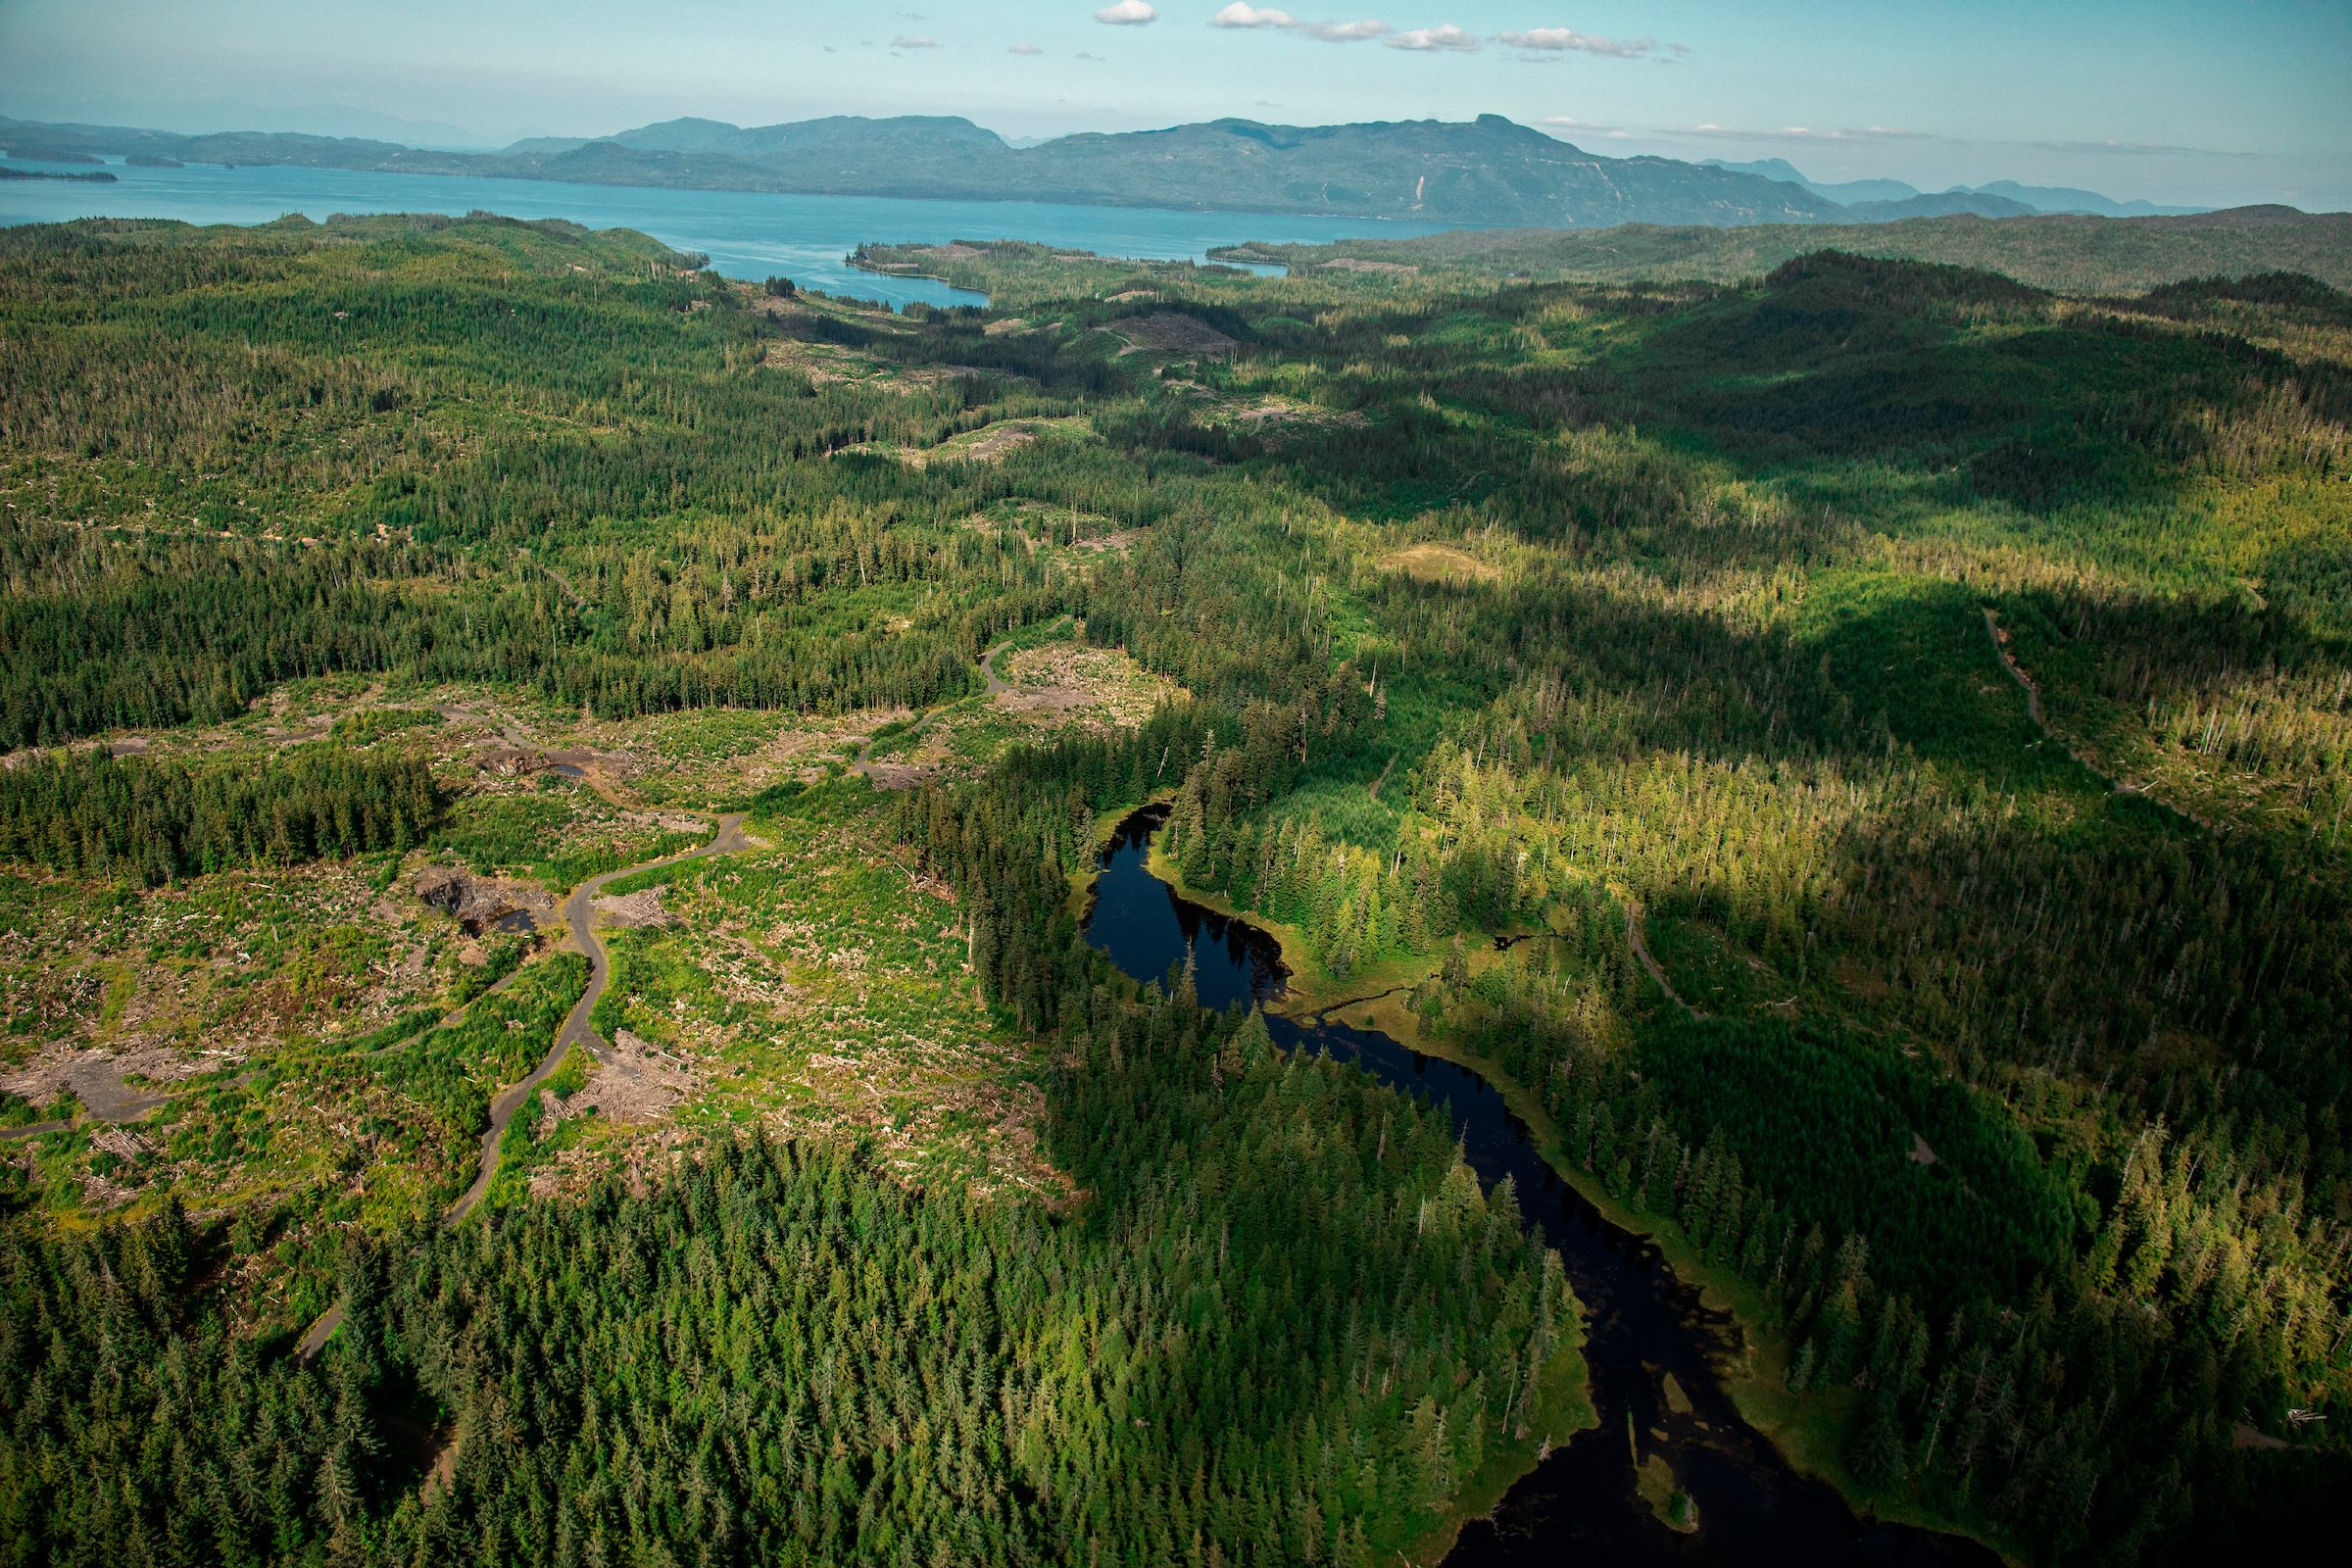 Some of these forest sites will be logged, and some will be put under carbon banking credits by Sealaska, which owns the land as part of settlement with the federal government. Image by Joshua Cogan. United States, 2019.